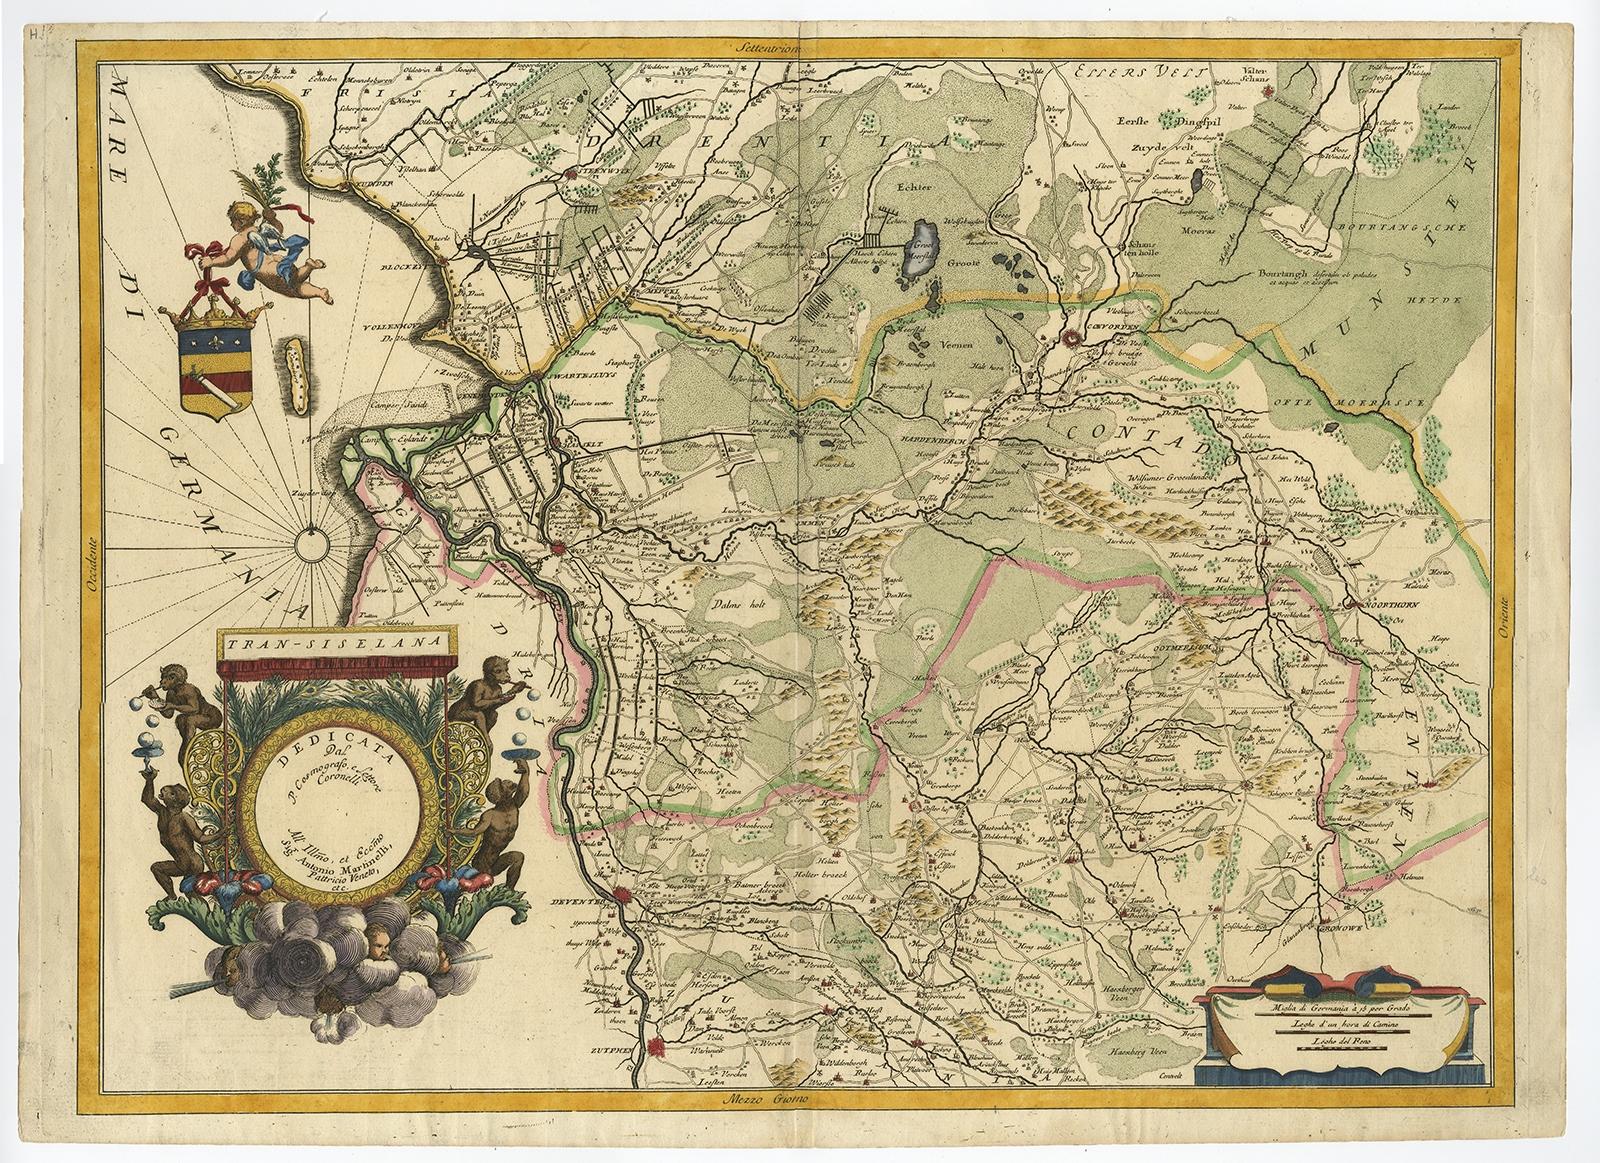 Antique map titled 'Tran-siselana'. Splendid detailed and decorative map of the province of Overijssel in the Netherlands by Vincenzo Coronelli. An elaborate title cartouche garlanded with intertwined flowers and dedicated to Antonio Martinelli.